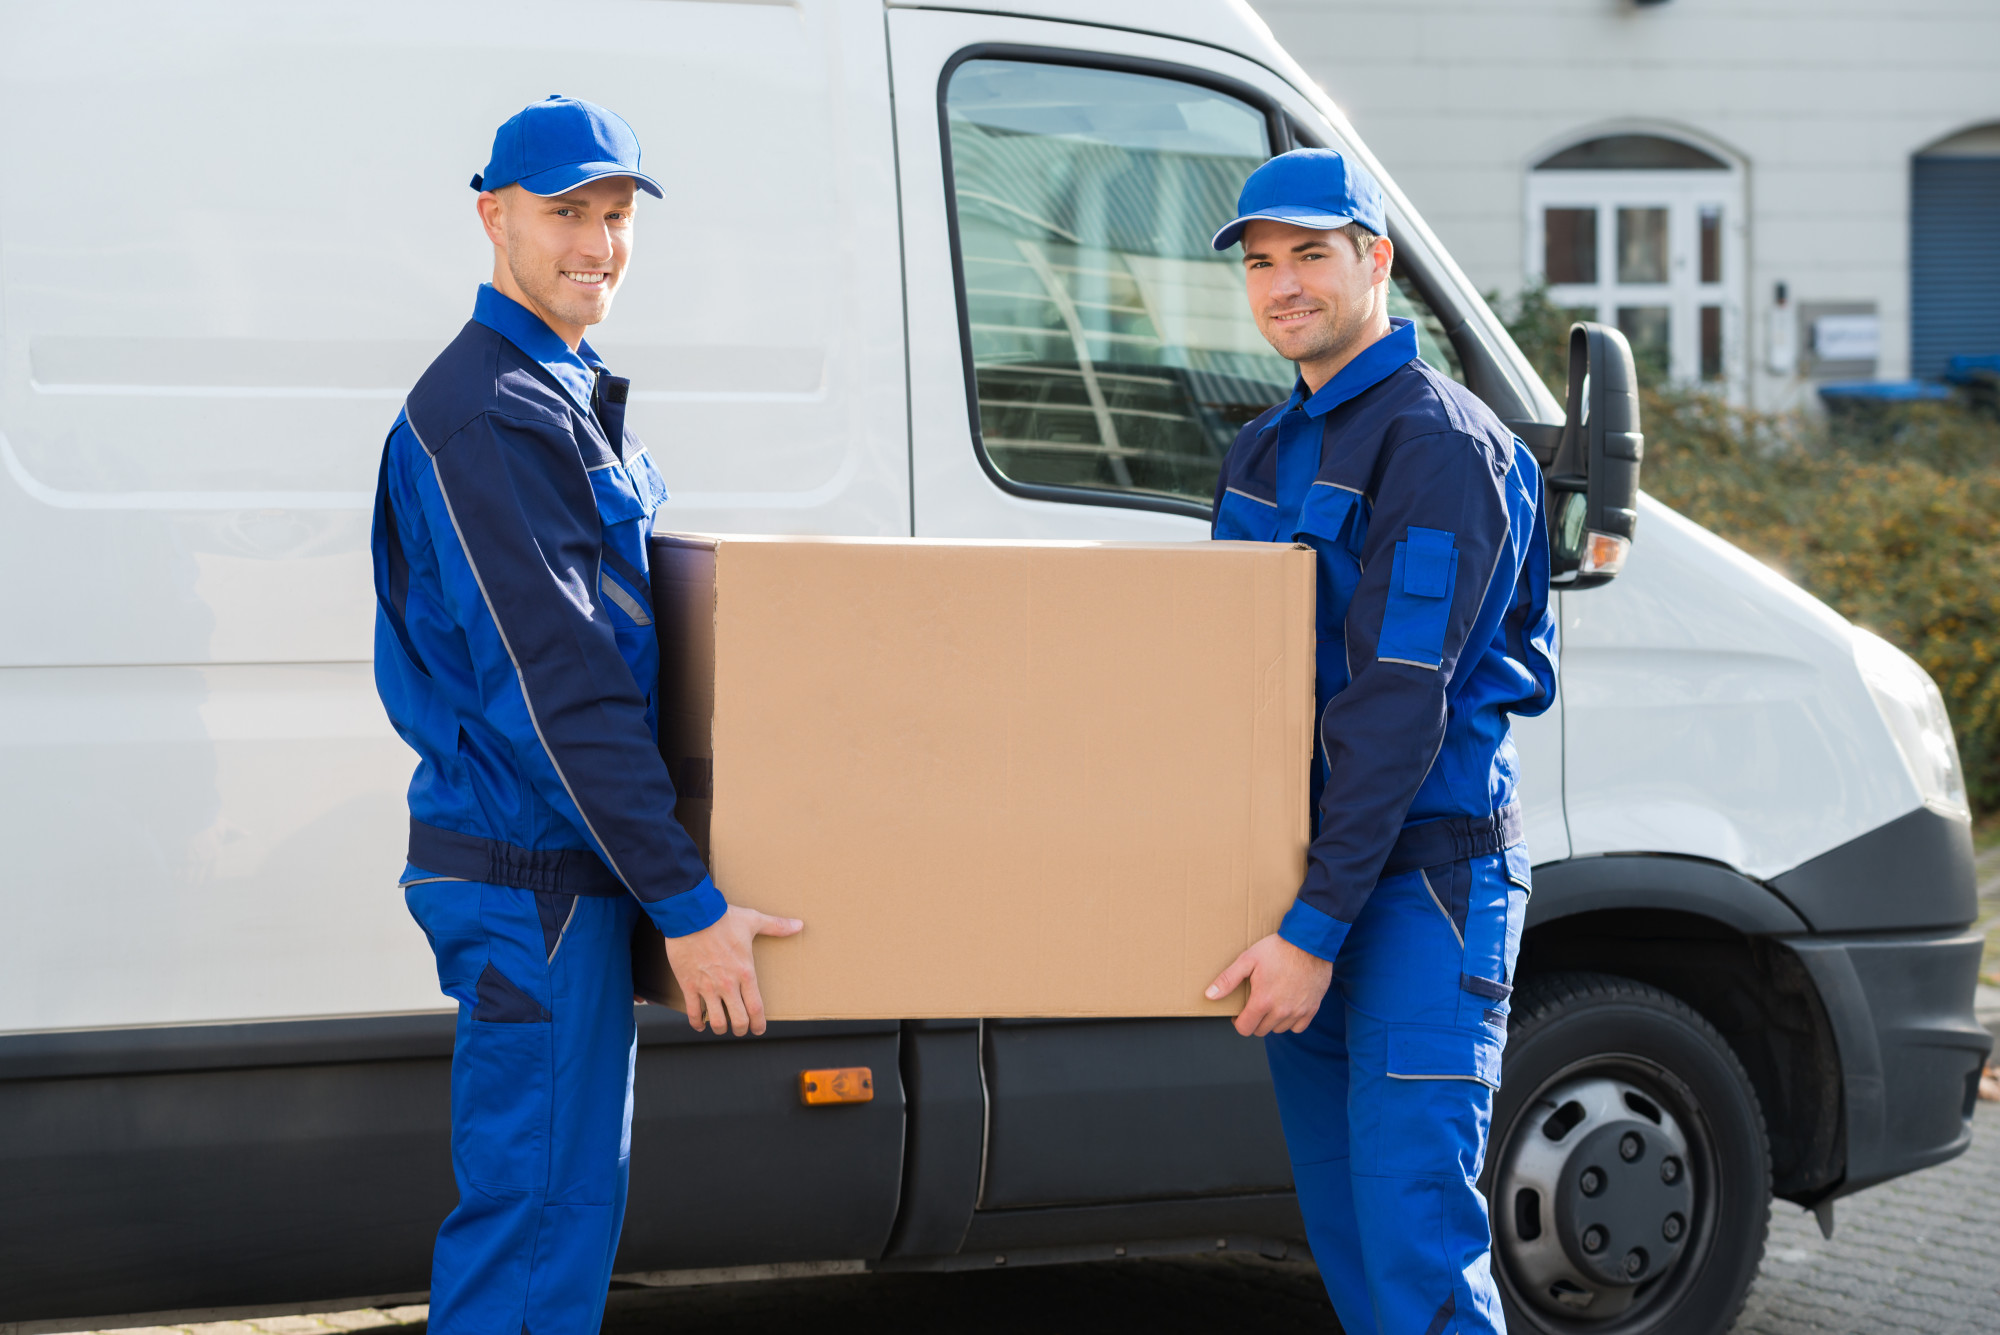 Are you moving houses or making your big move to college and need a local moving company to help out? Learn what to look for in a company before hiring one.